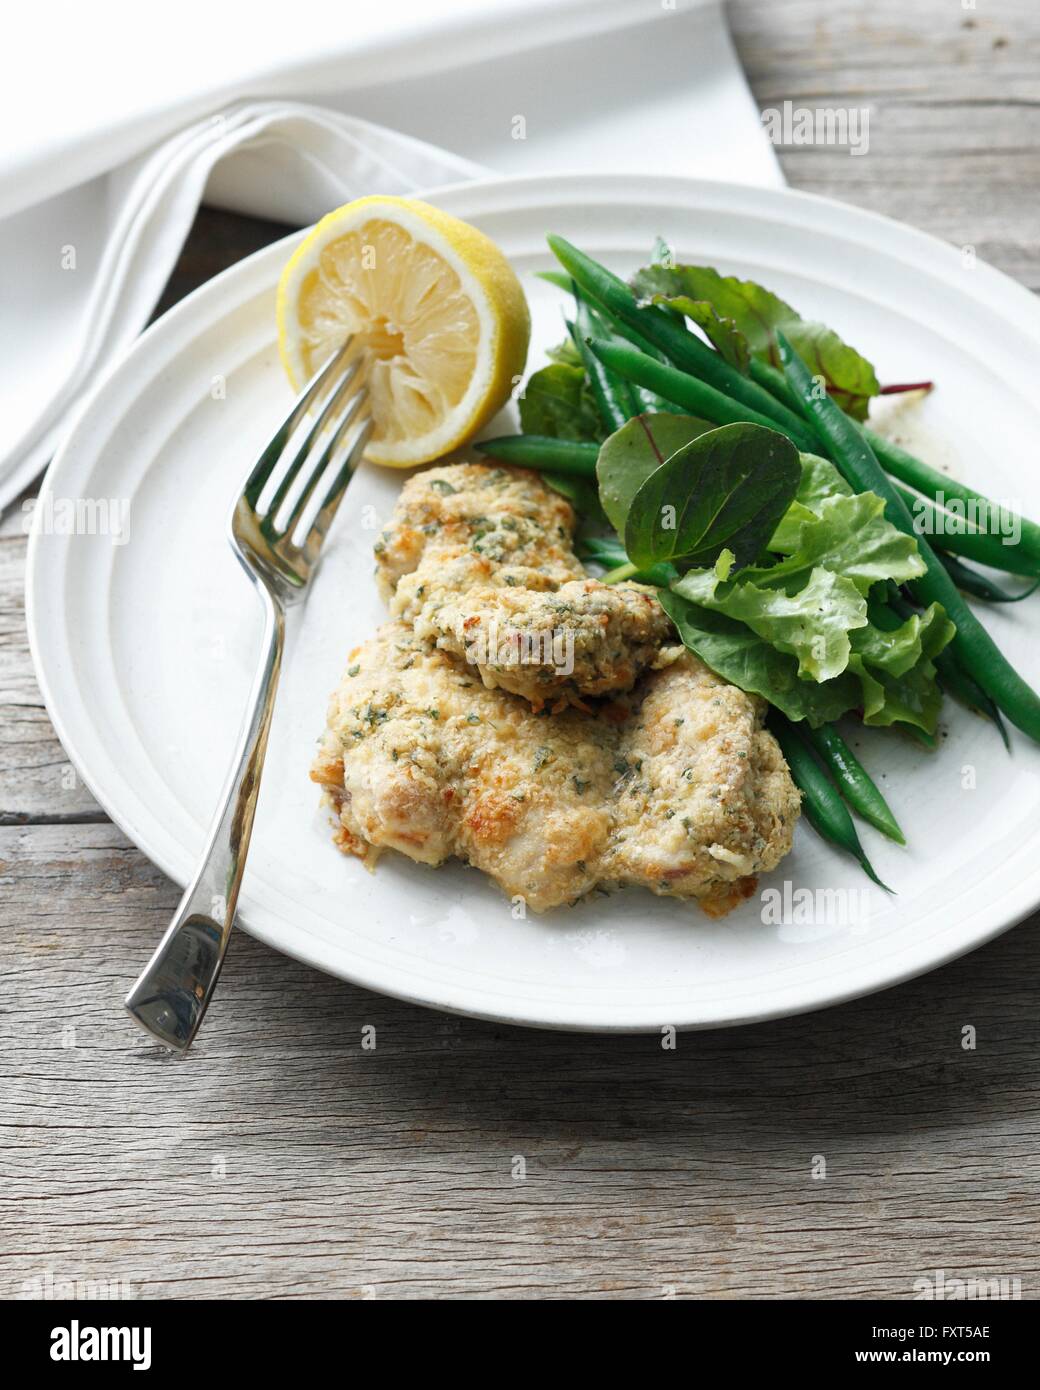 Plate of wholemeal chicken with crusted chicken pieces, green beans, mesclun salad and lemon Stock Photo